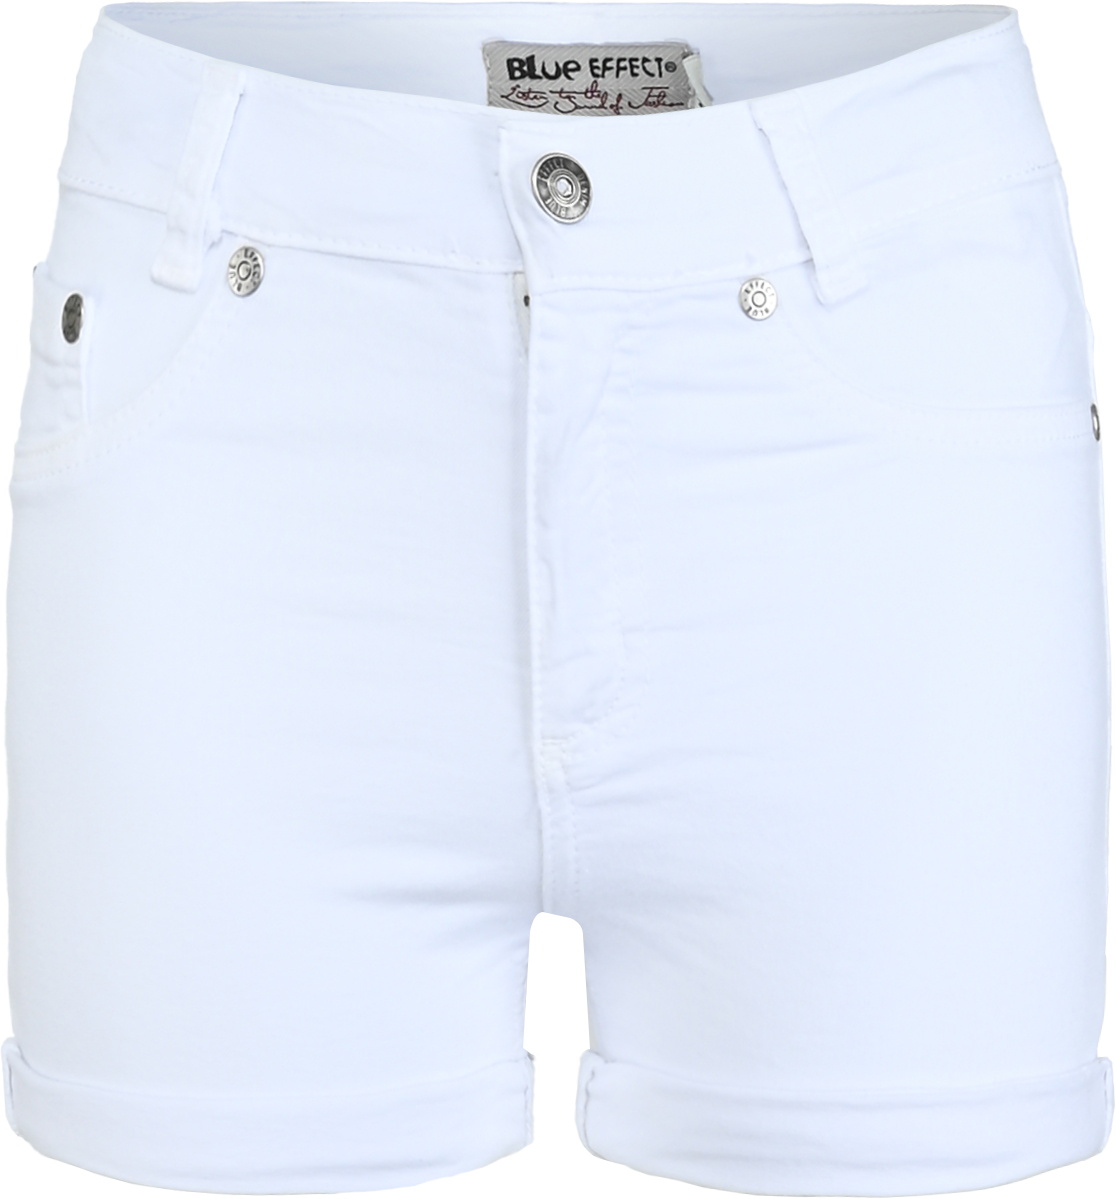 3192-Girls High-Waist Short available in Normal